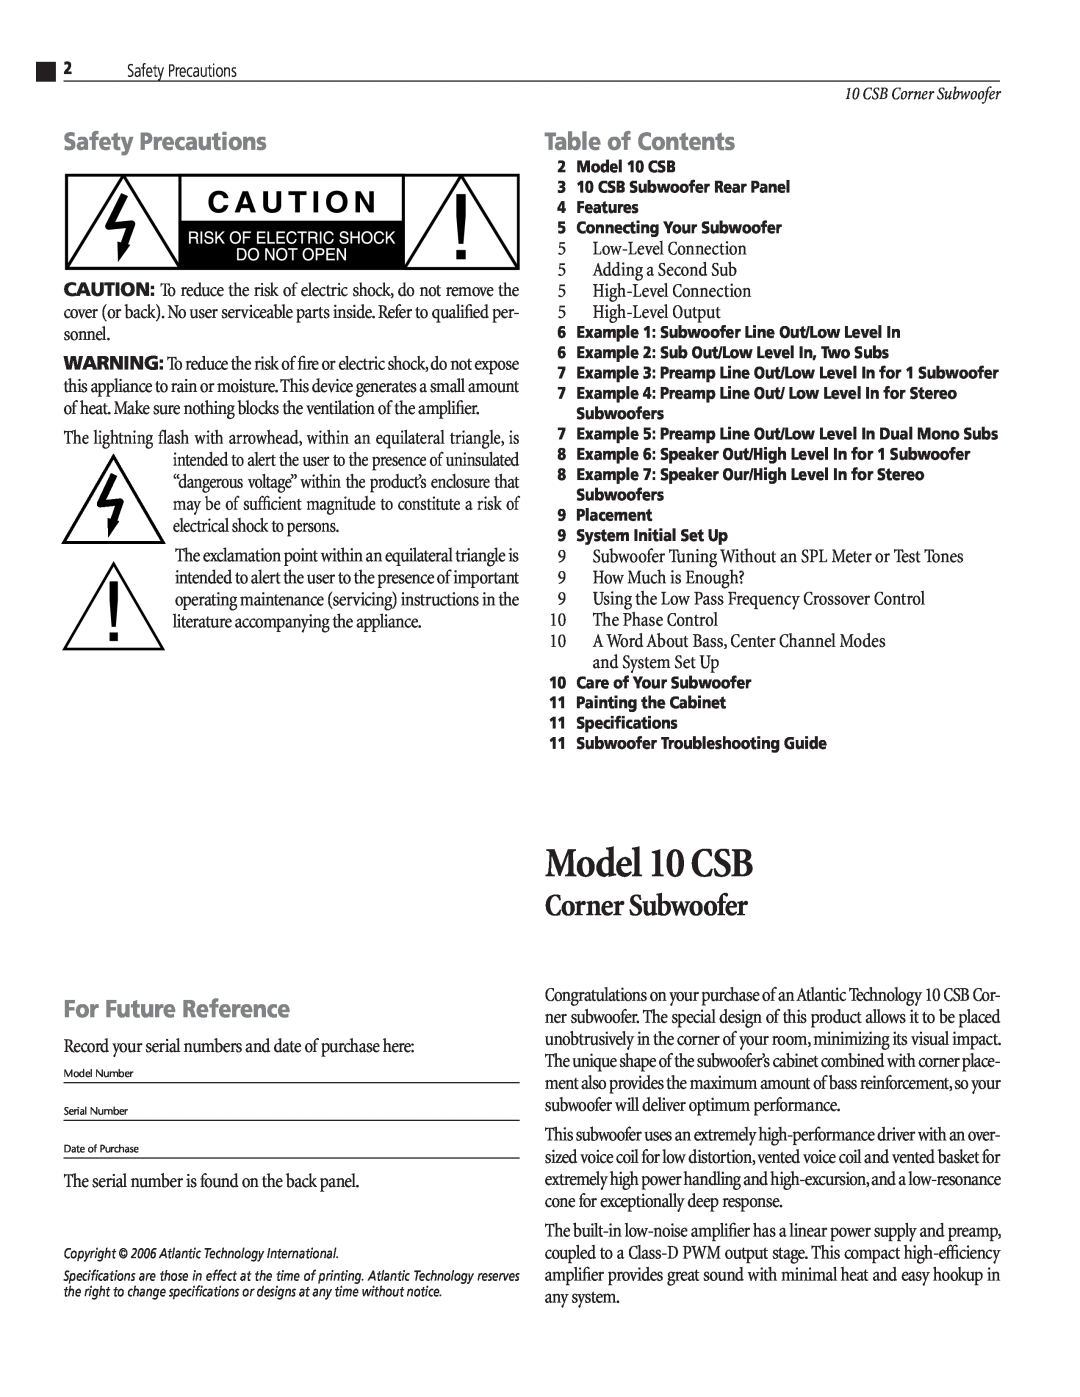 Atlantic Technology Safety Precautions, Table of Contents, For Future Reference, Model 10 CSB, Corner Subwoofer 